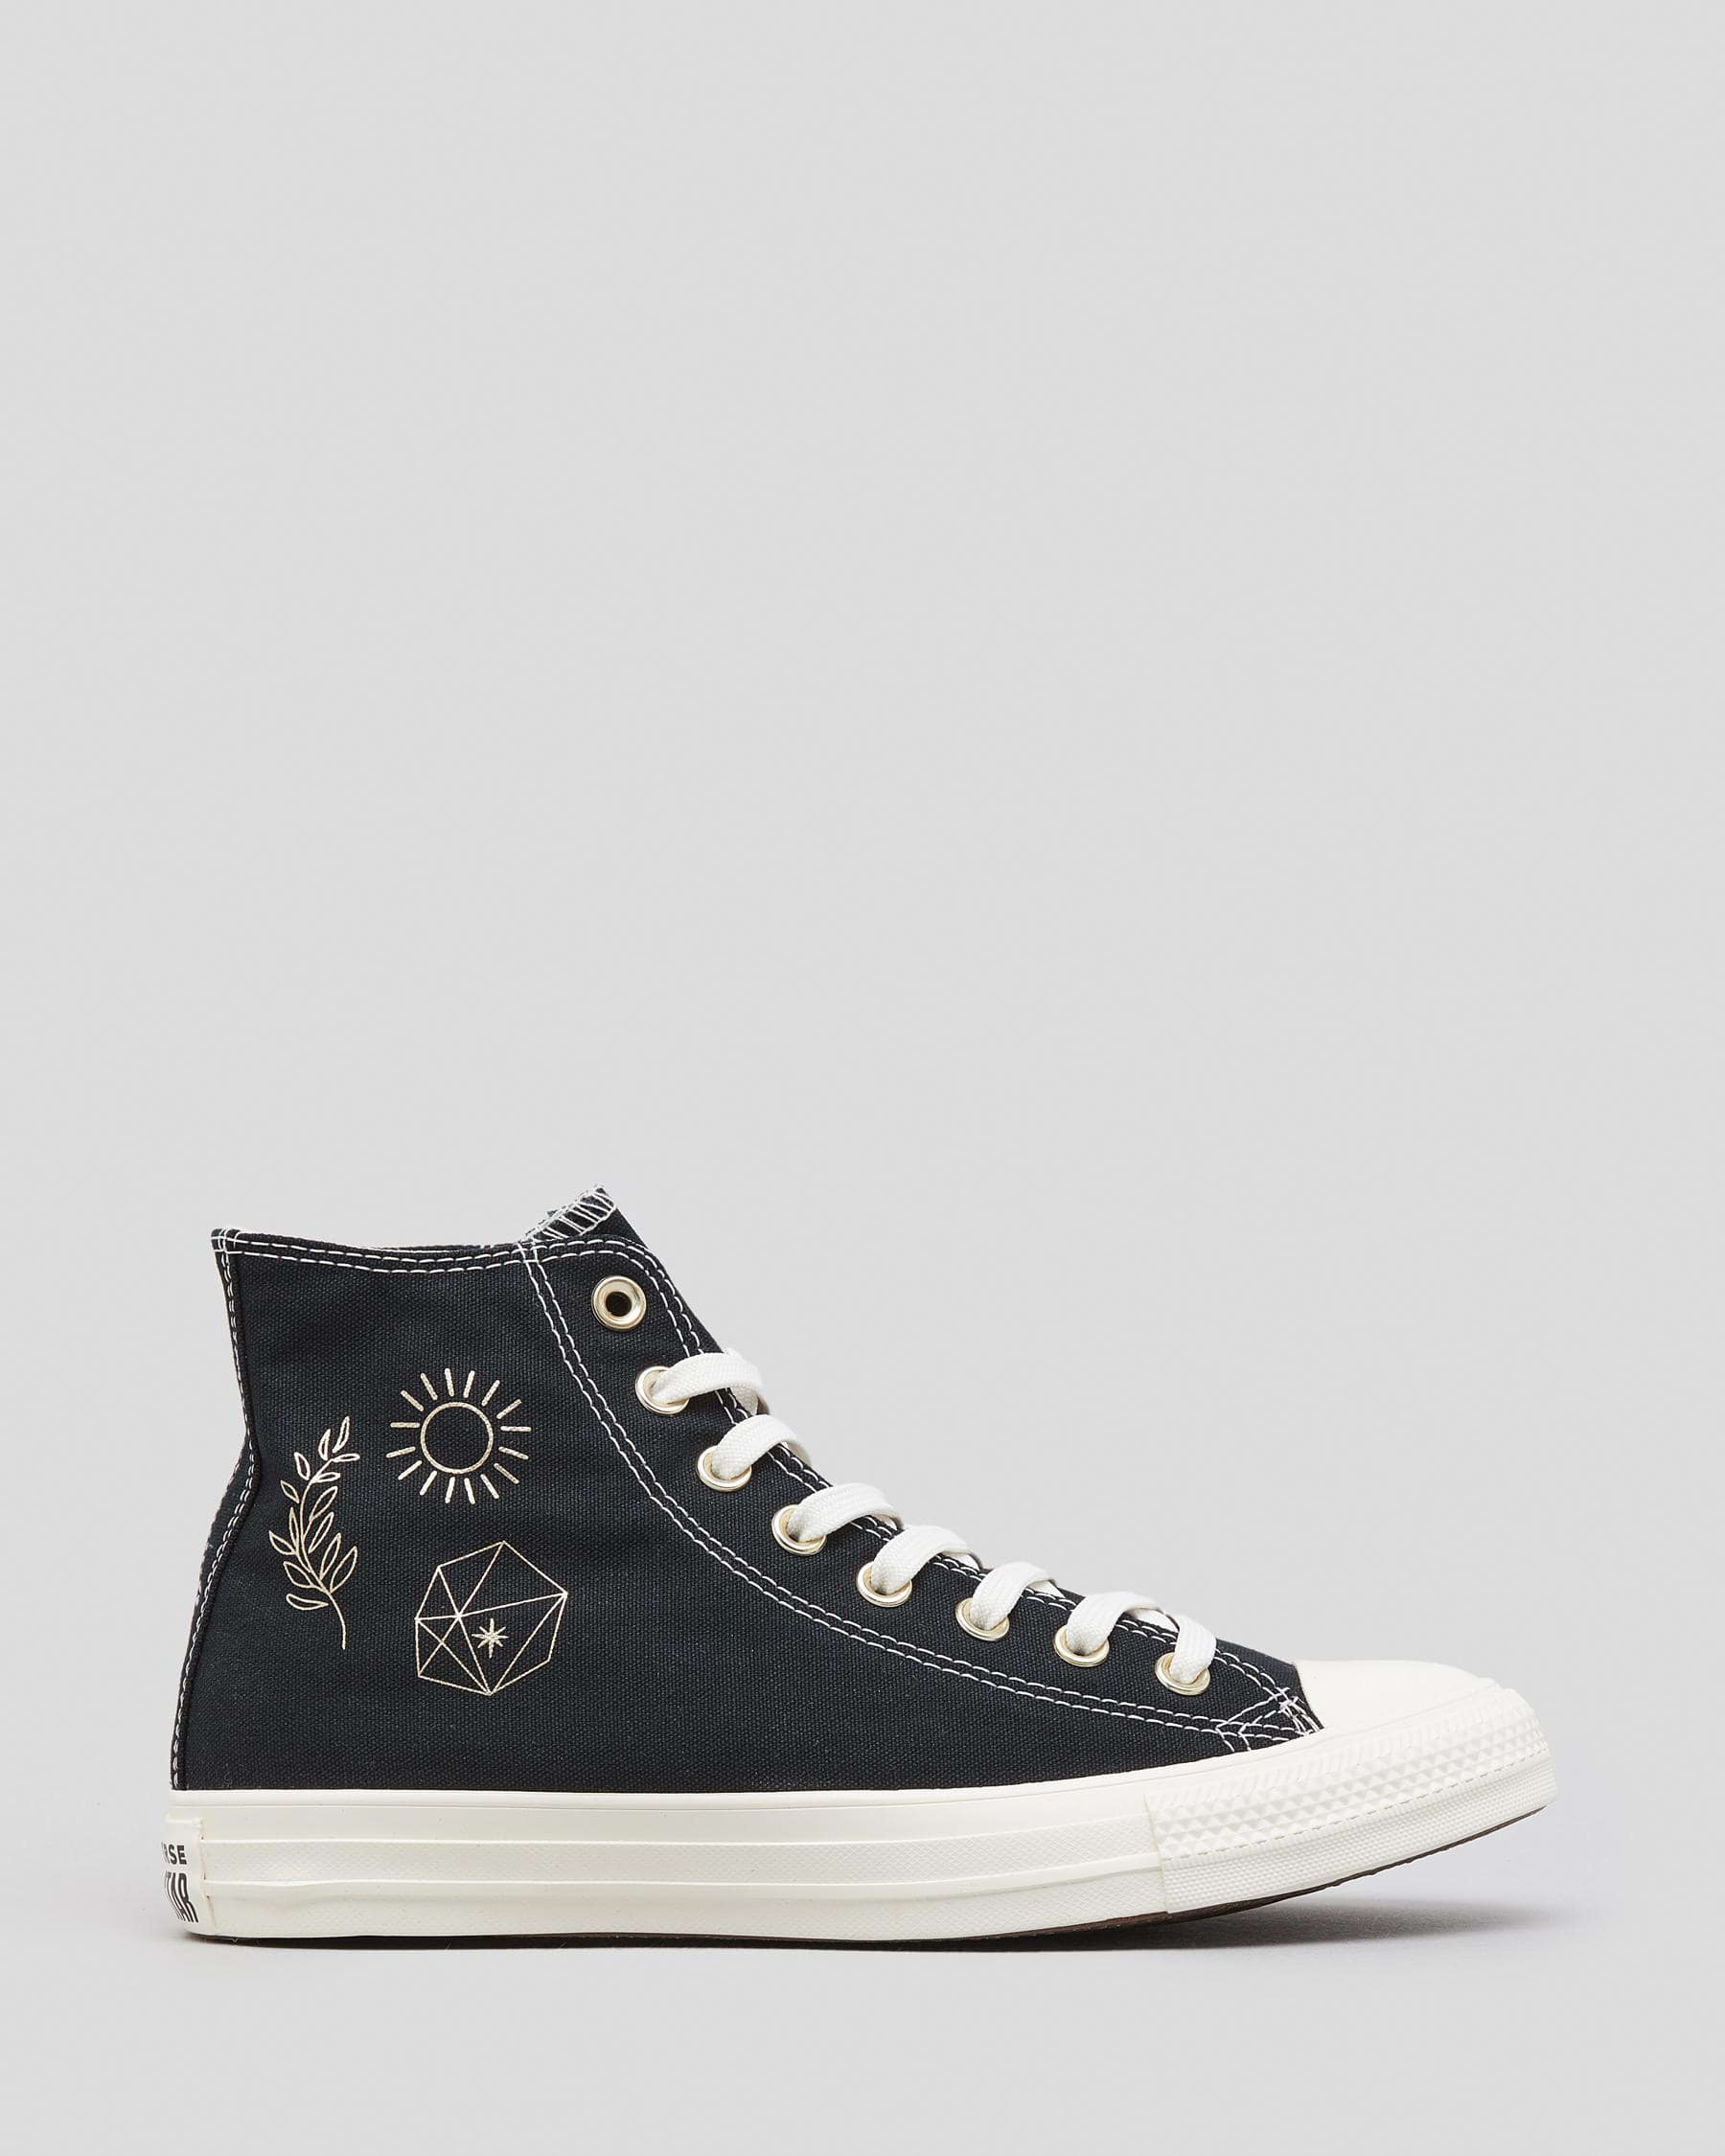 Converse Womens Chuck Taylor All Star HI Shoes In Black/light Gold ...